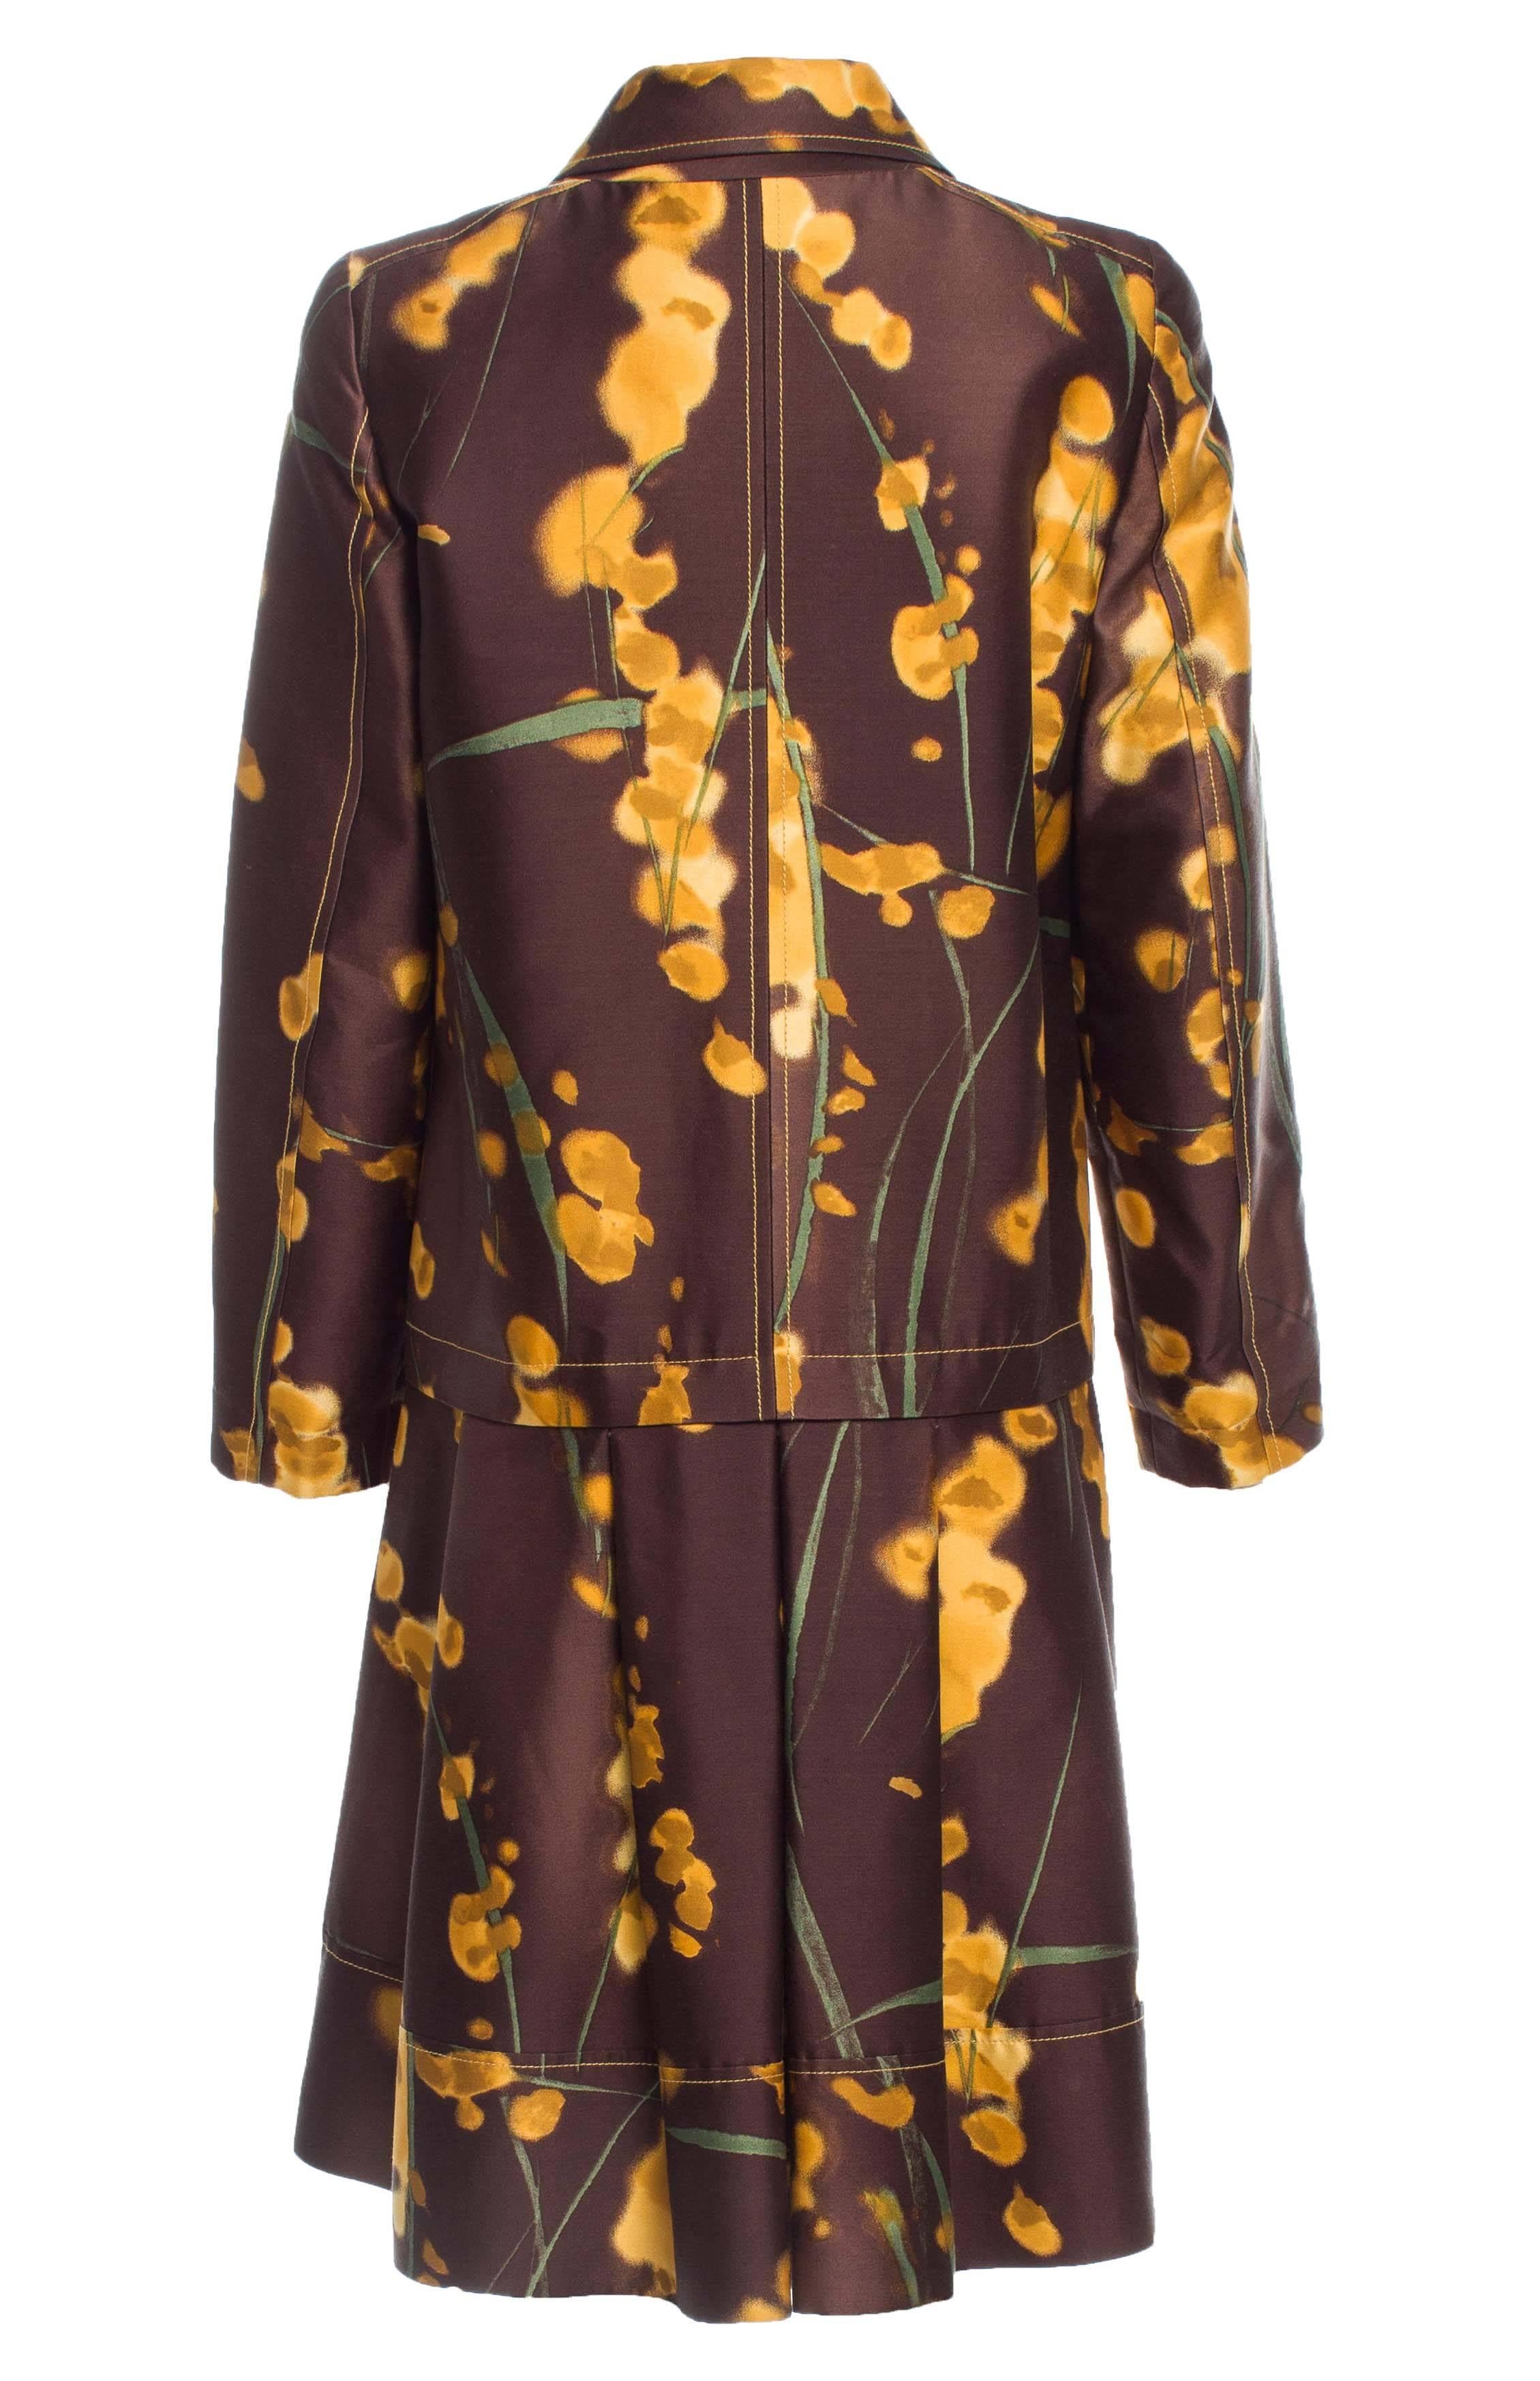 Oscar de la Renta Silk Wool Trench Coat 
Designer size - 6
F/W 2008 Collection
62% Silk, 38% Wool; Lining 100% Silk
Pleating at hips and concealed snap closures at center front.
Colors - Brown, ochre and green.
Dual slit pockets at sides and two